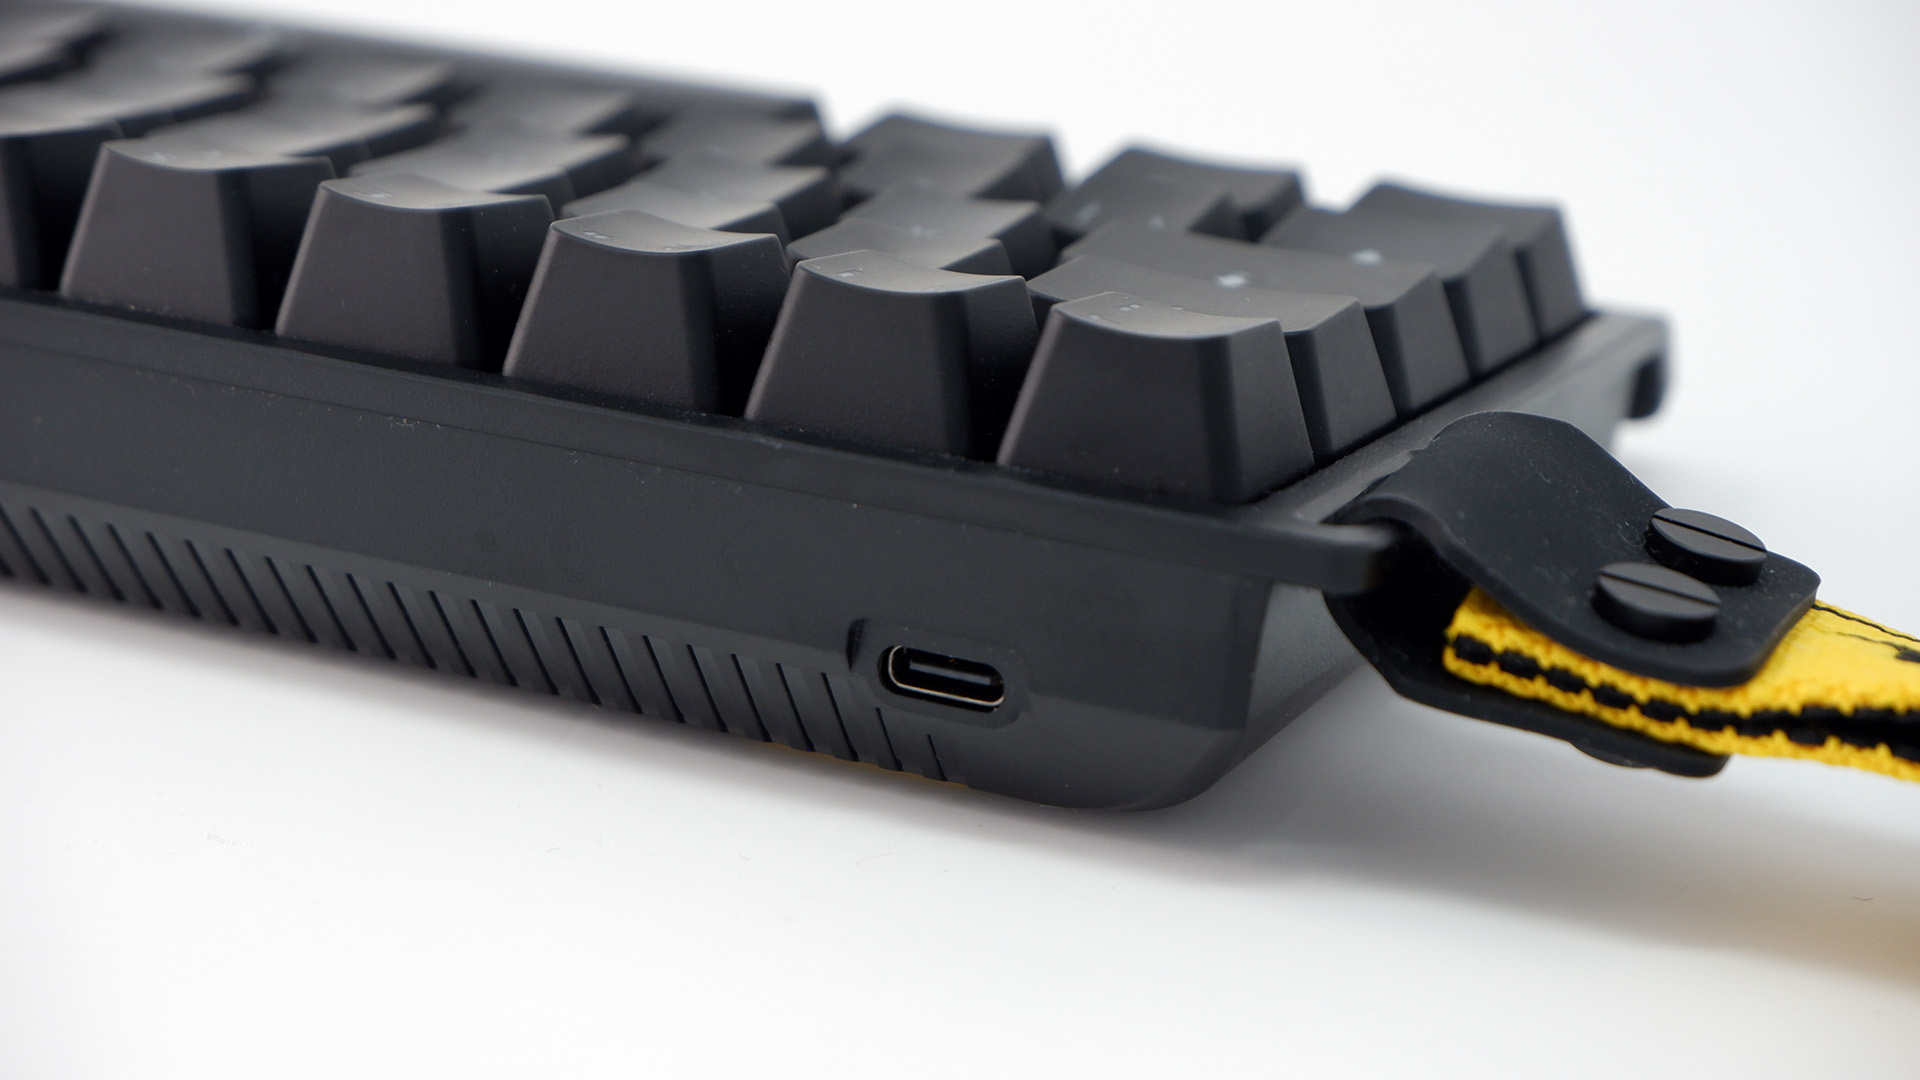 Wooting 60HE gaming keyboard pictured with yellow wrist strap attached.